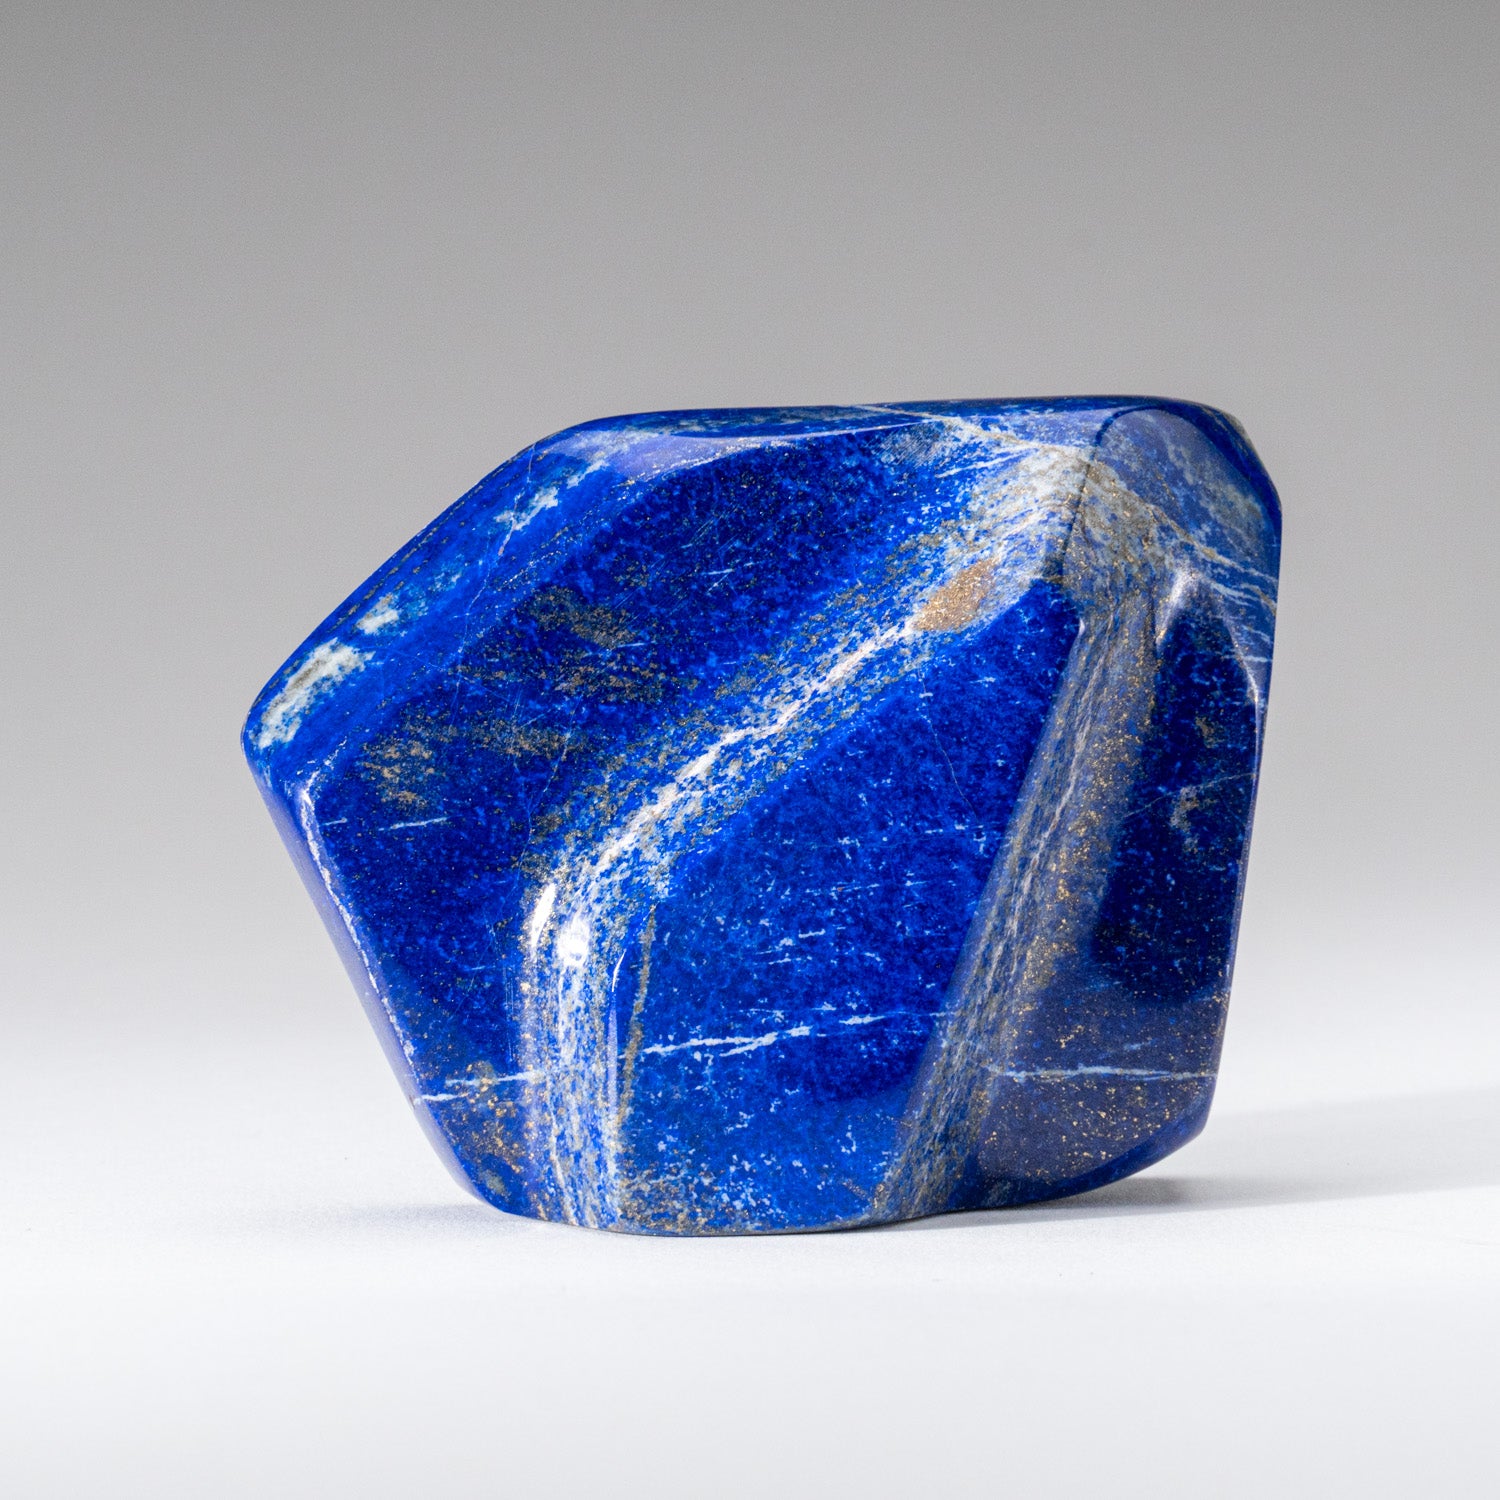 Polished Lapis Lazuli Freeform from Afghanistan (390 grams)